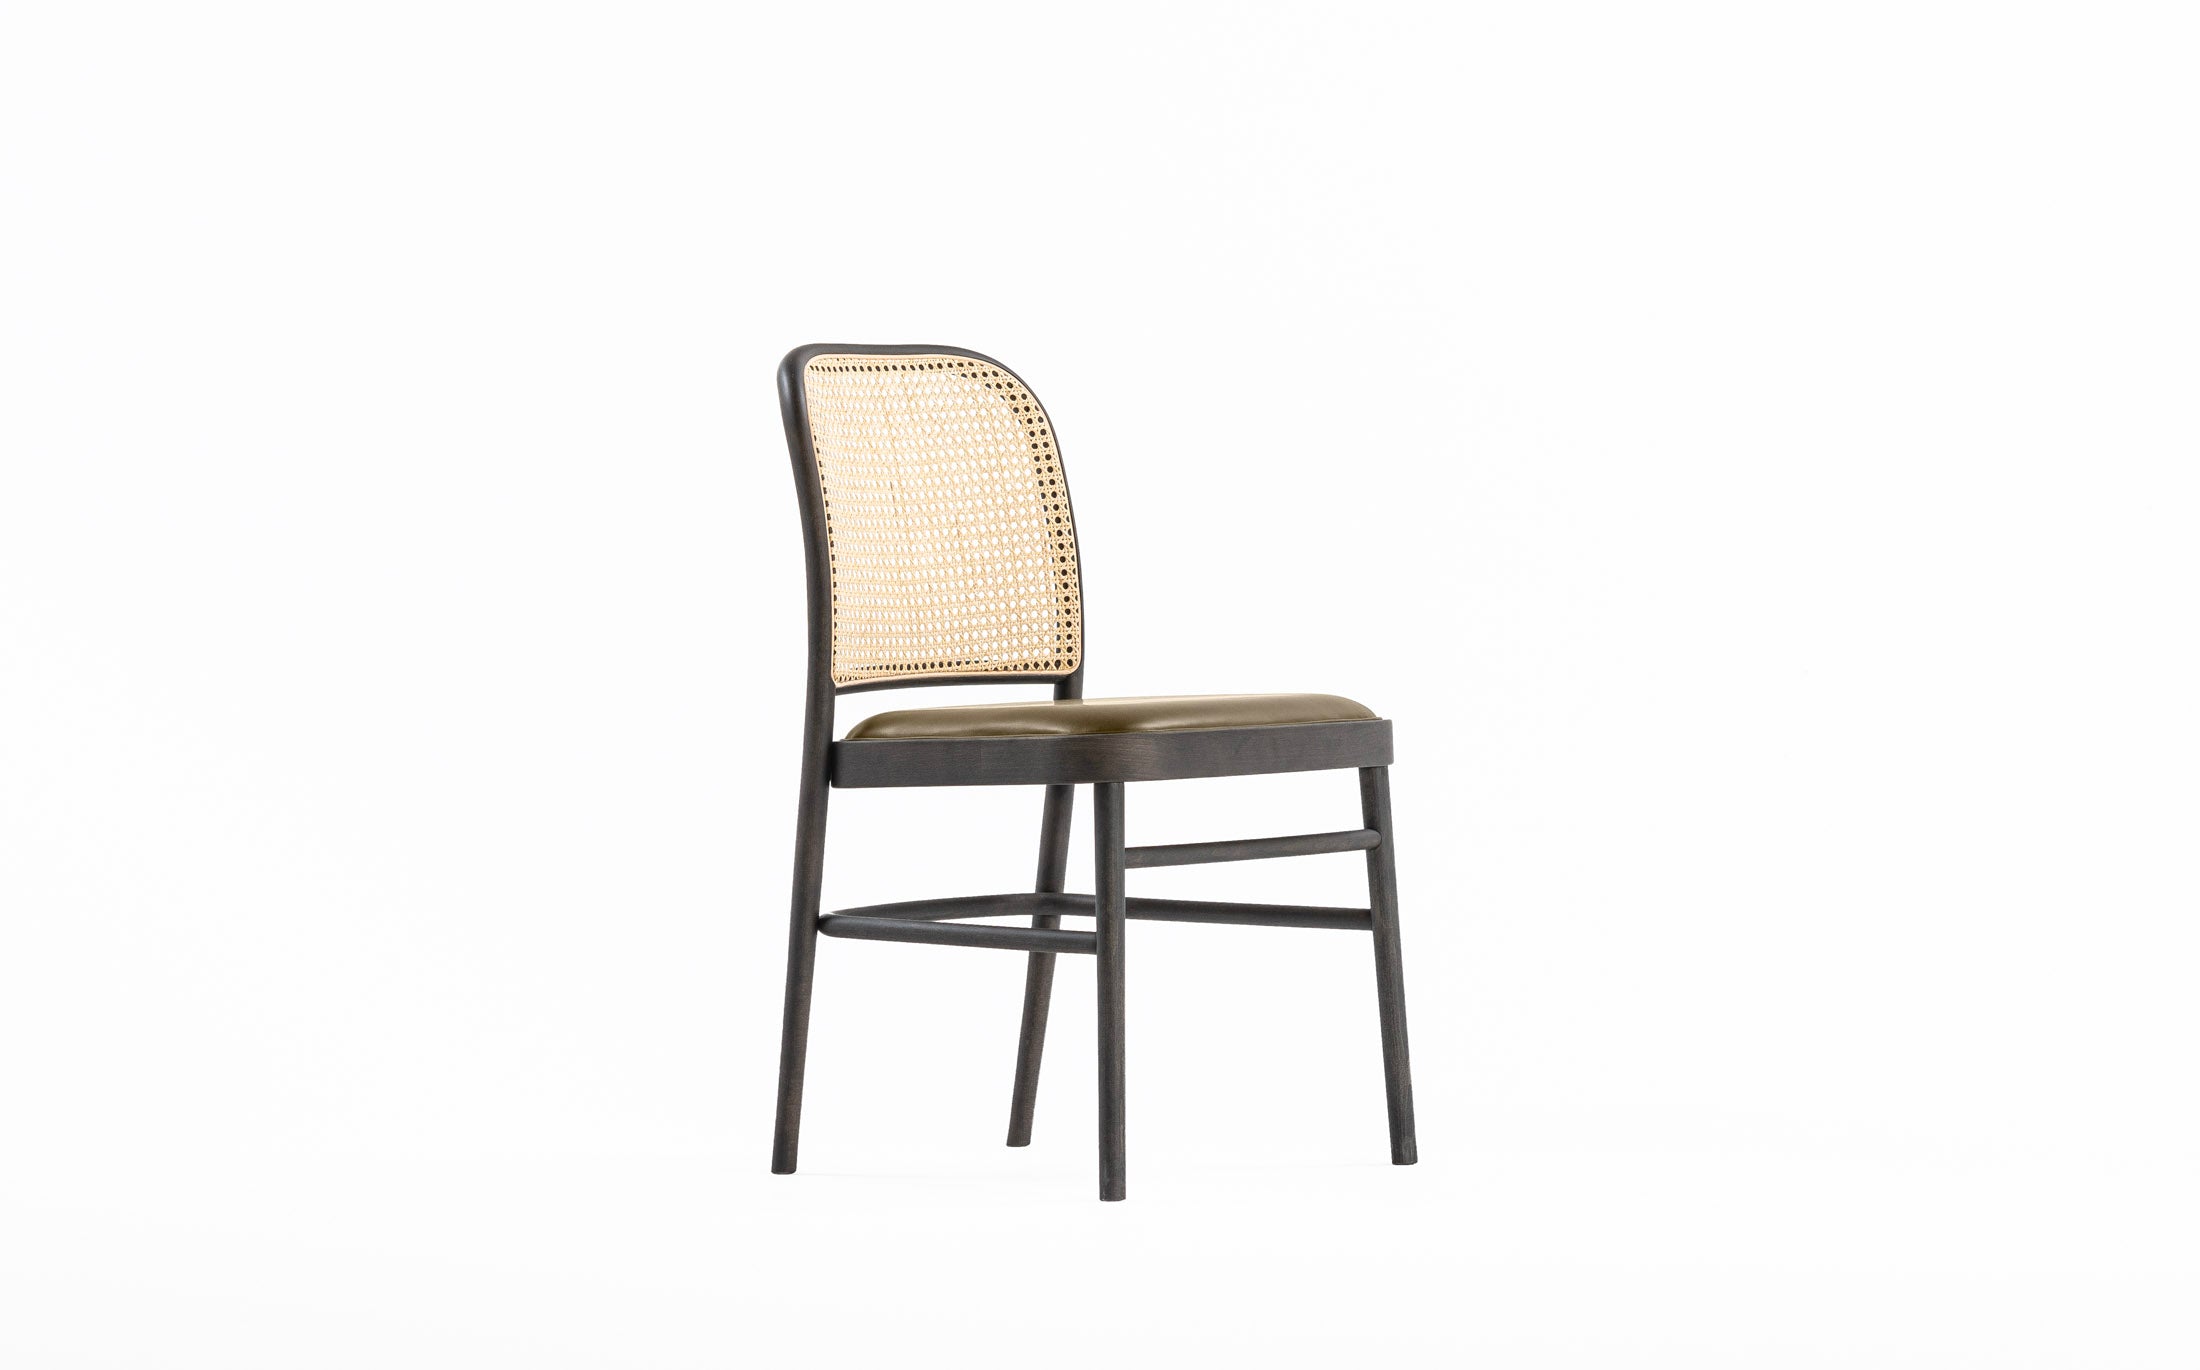 The bent chair #Seat materials_smooth leather 40108